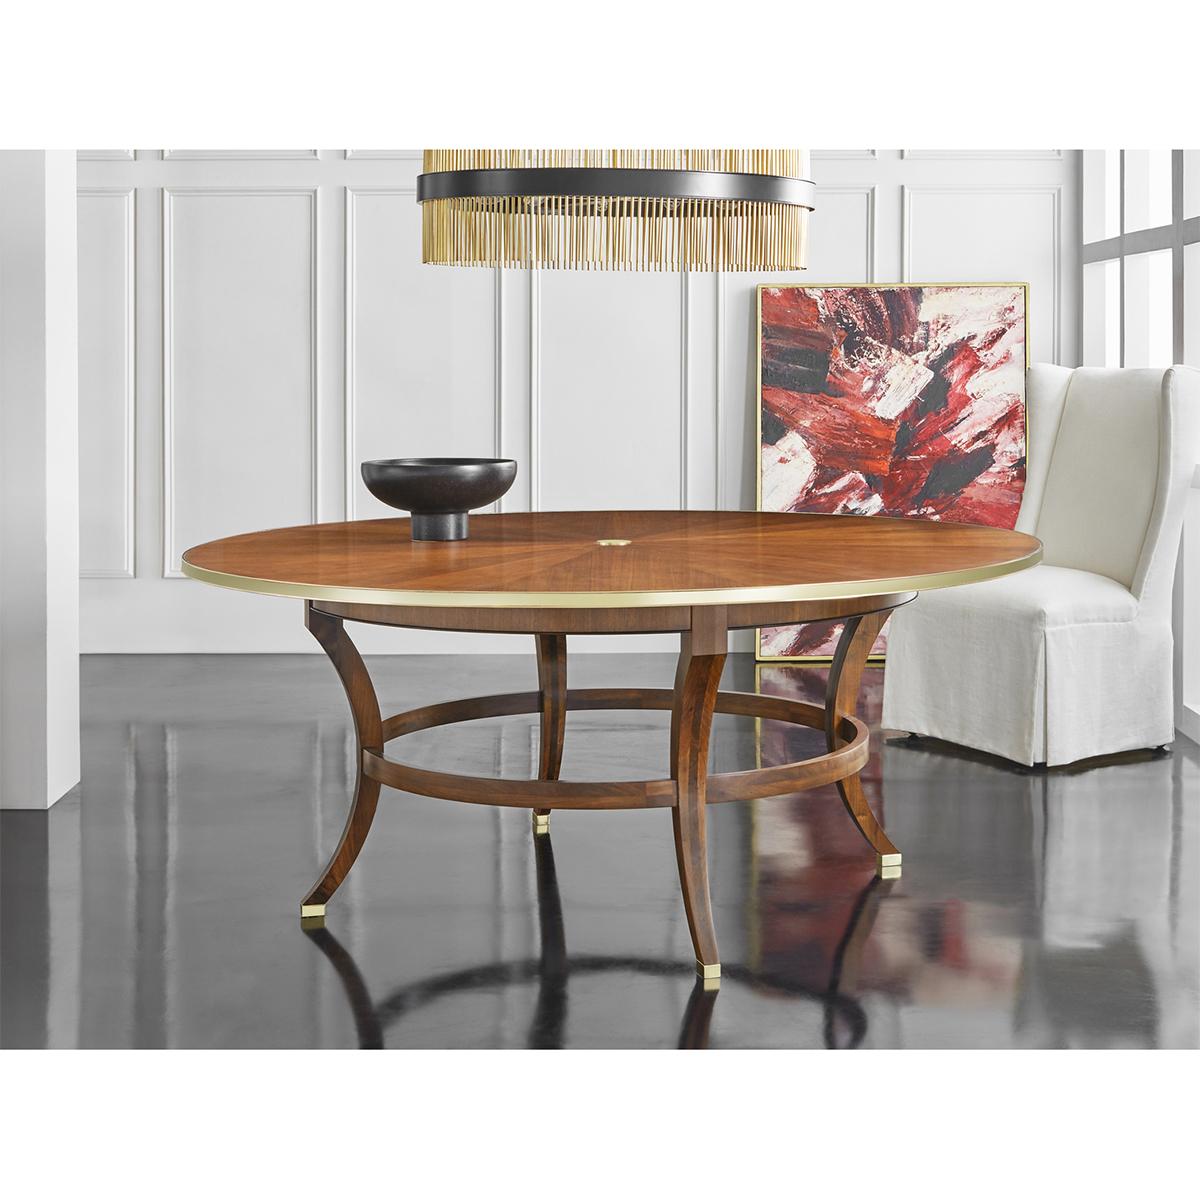 An Art Deco round dining table. Warm brown walnut veneers with a rayed inlaid top, a solid brass central applique and brass trim molding. Raised on four sabre form legs with a round stretcher and brass feet.

Dimensions: 72